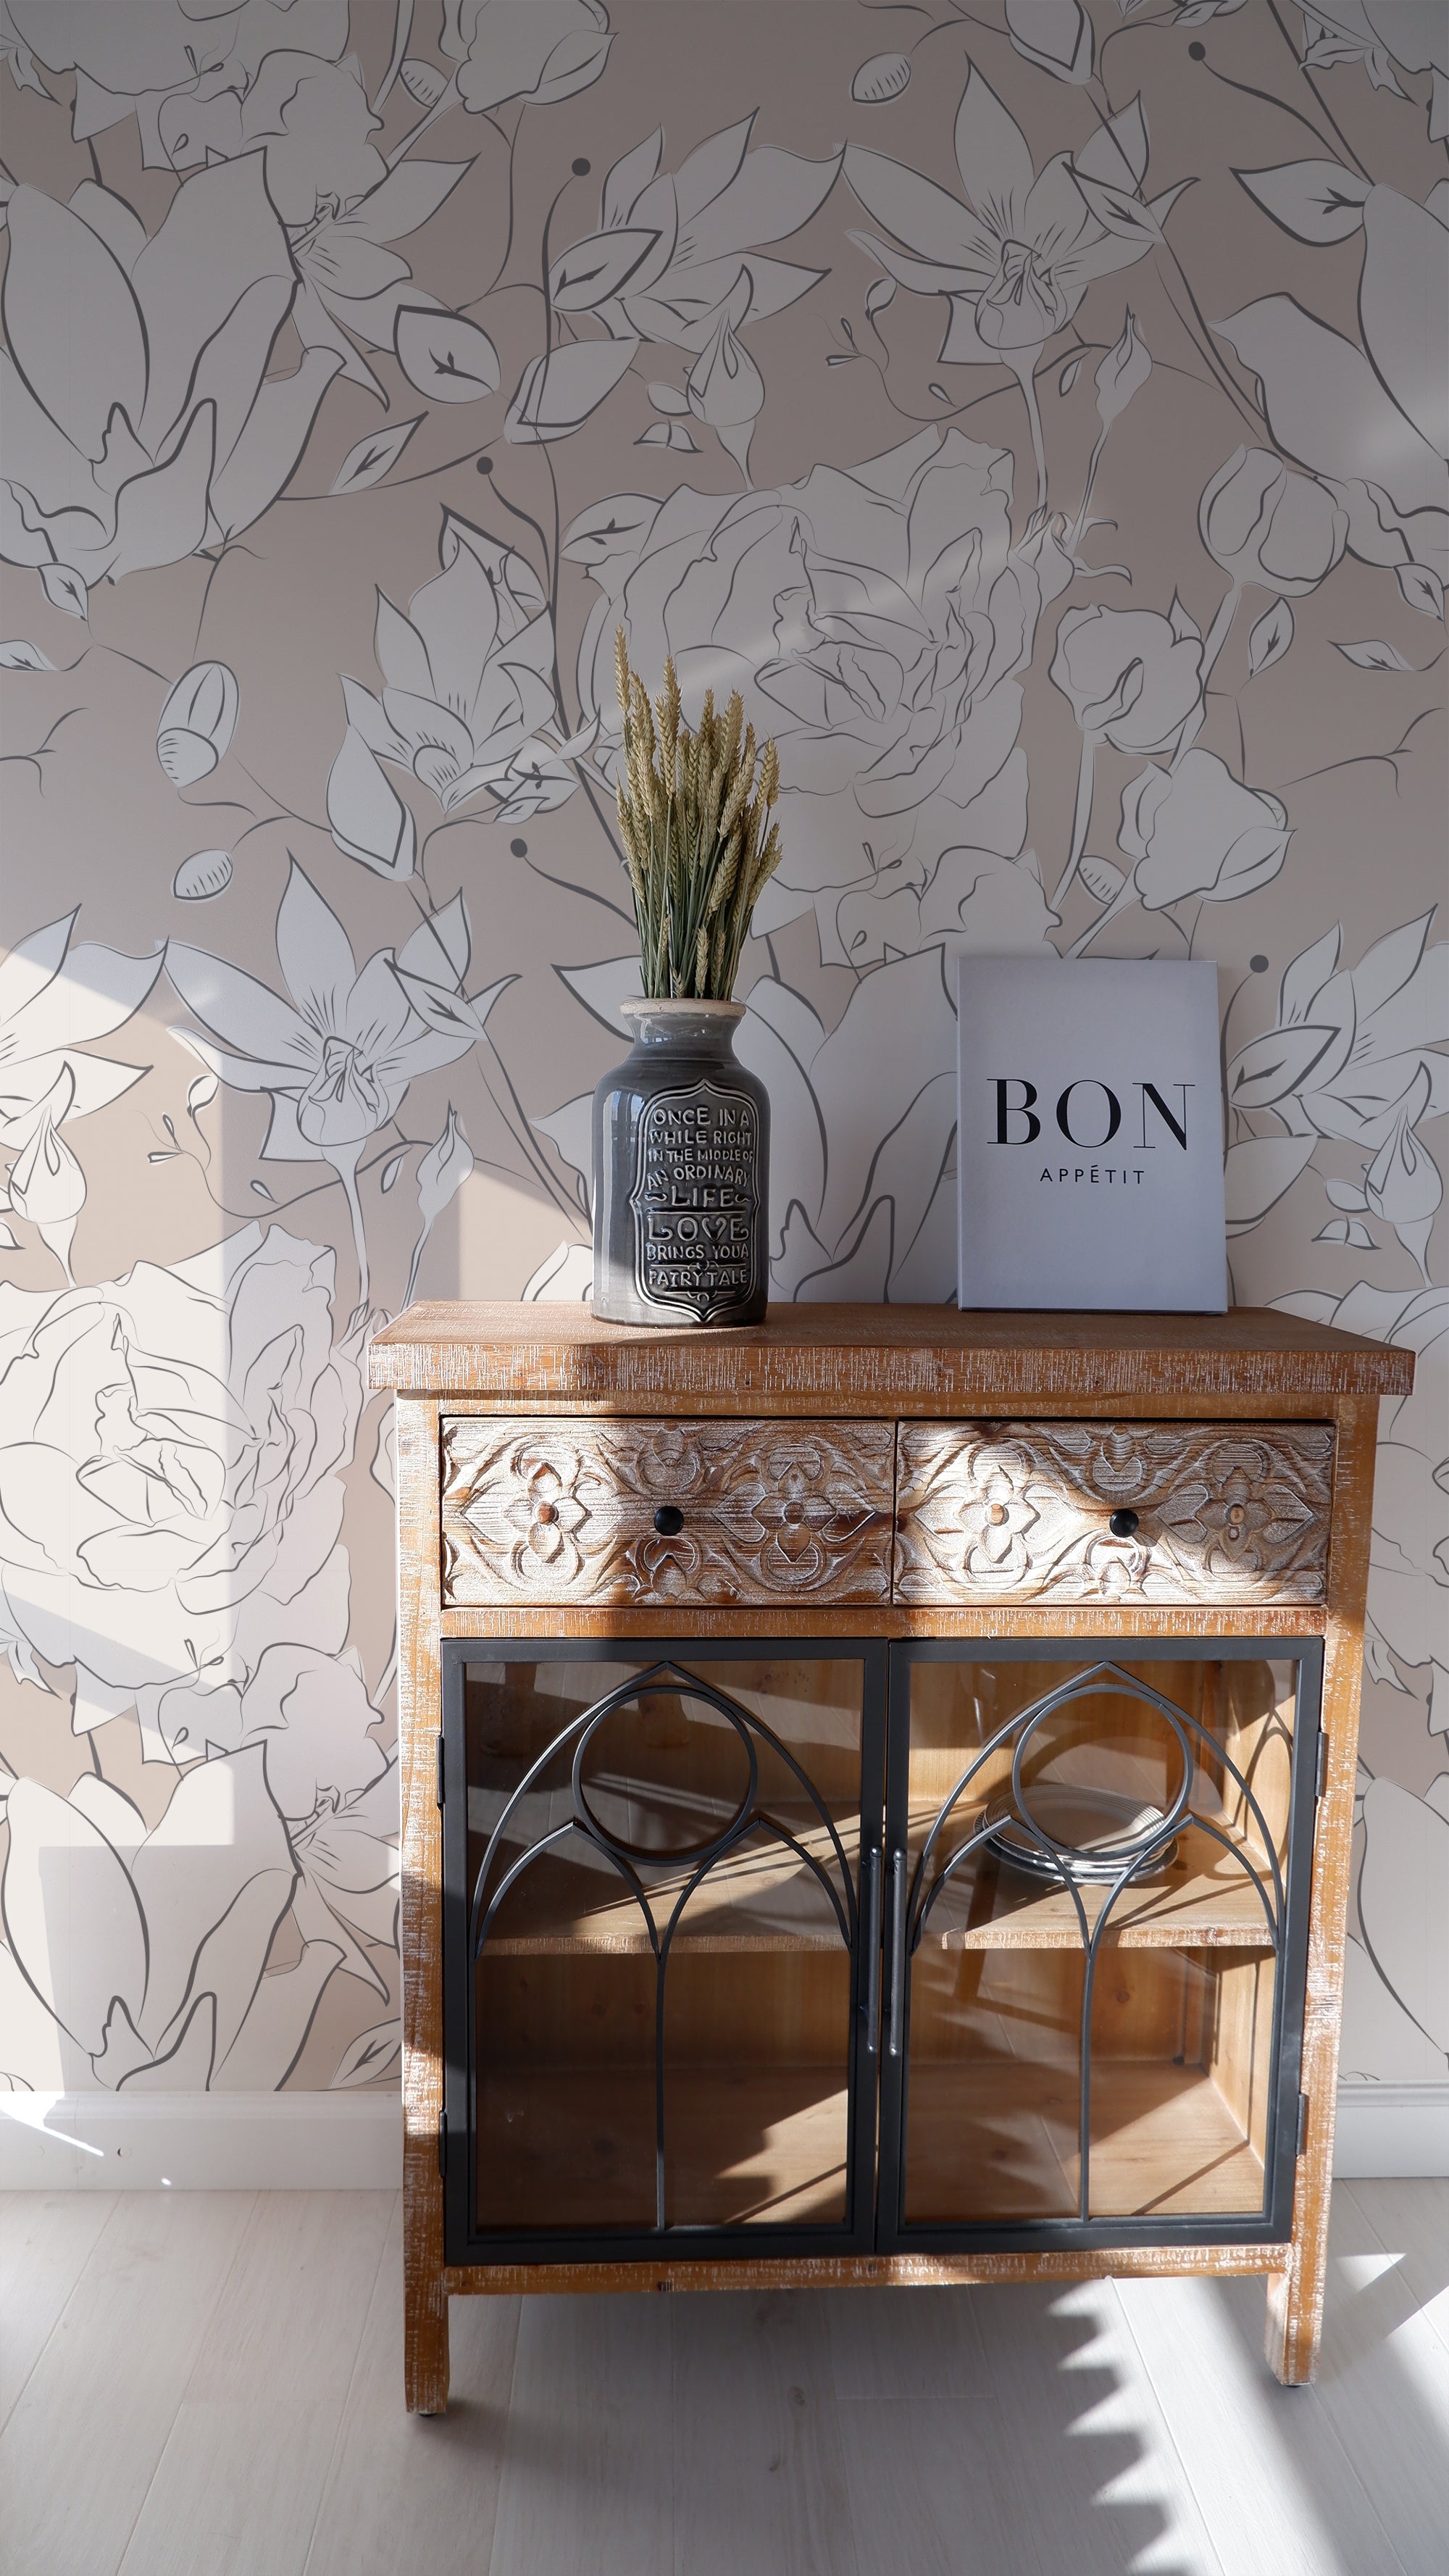 A stylish vignette featuring an ornate wooden cabinet against a wall adorned with the Floral Beauty Wallpaper. The wallpaper showcases large-scale, monochrome floral outlines in shades of white and gray on a taupe background. A decorative vase with dried flowers and a book labeled "BON APPETIT" add a rustic charm to the setting.